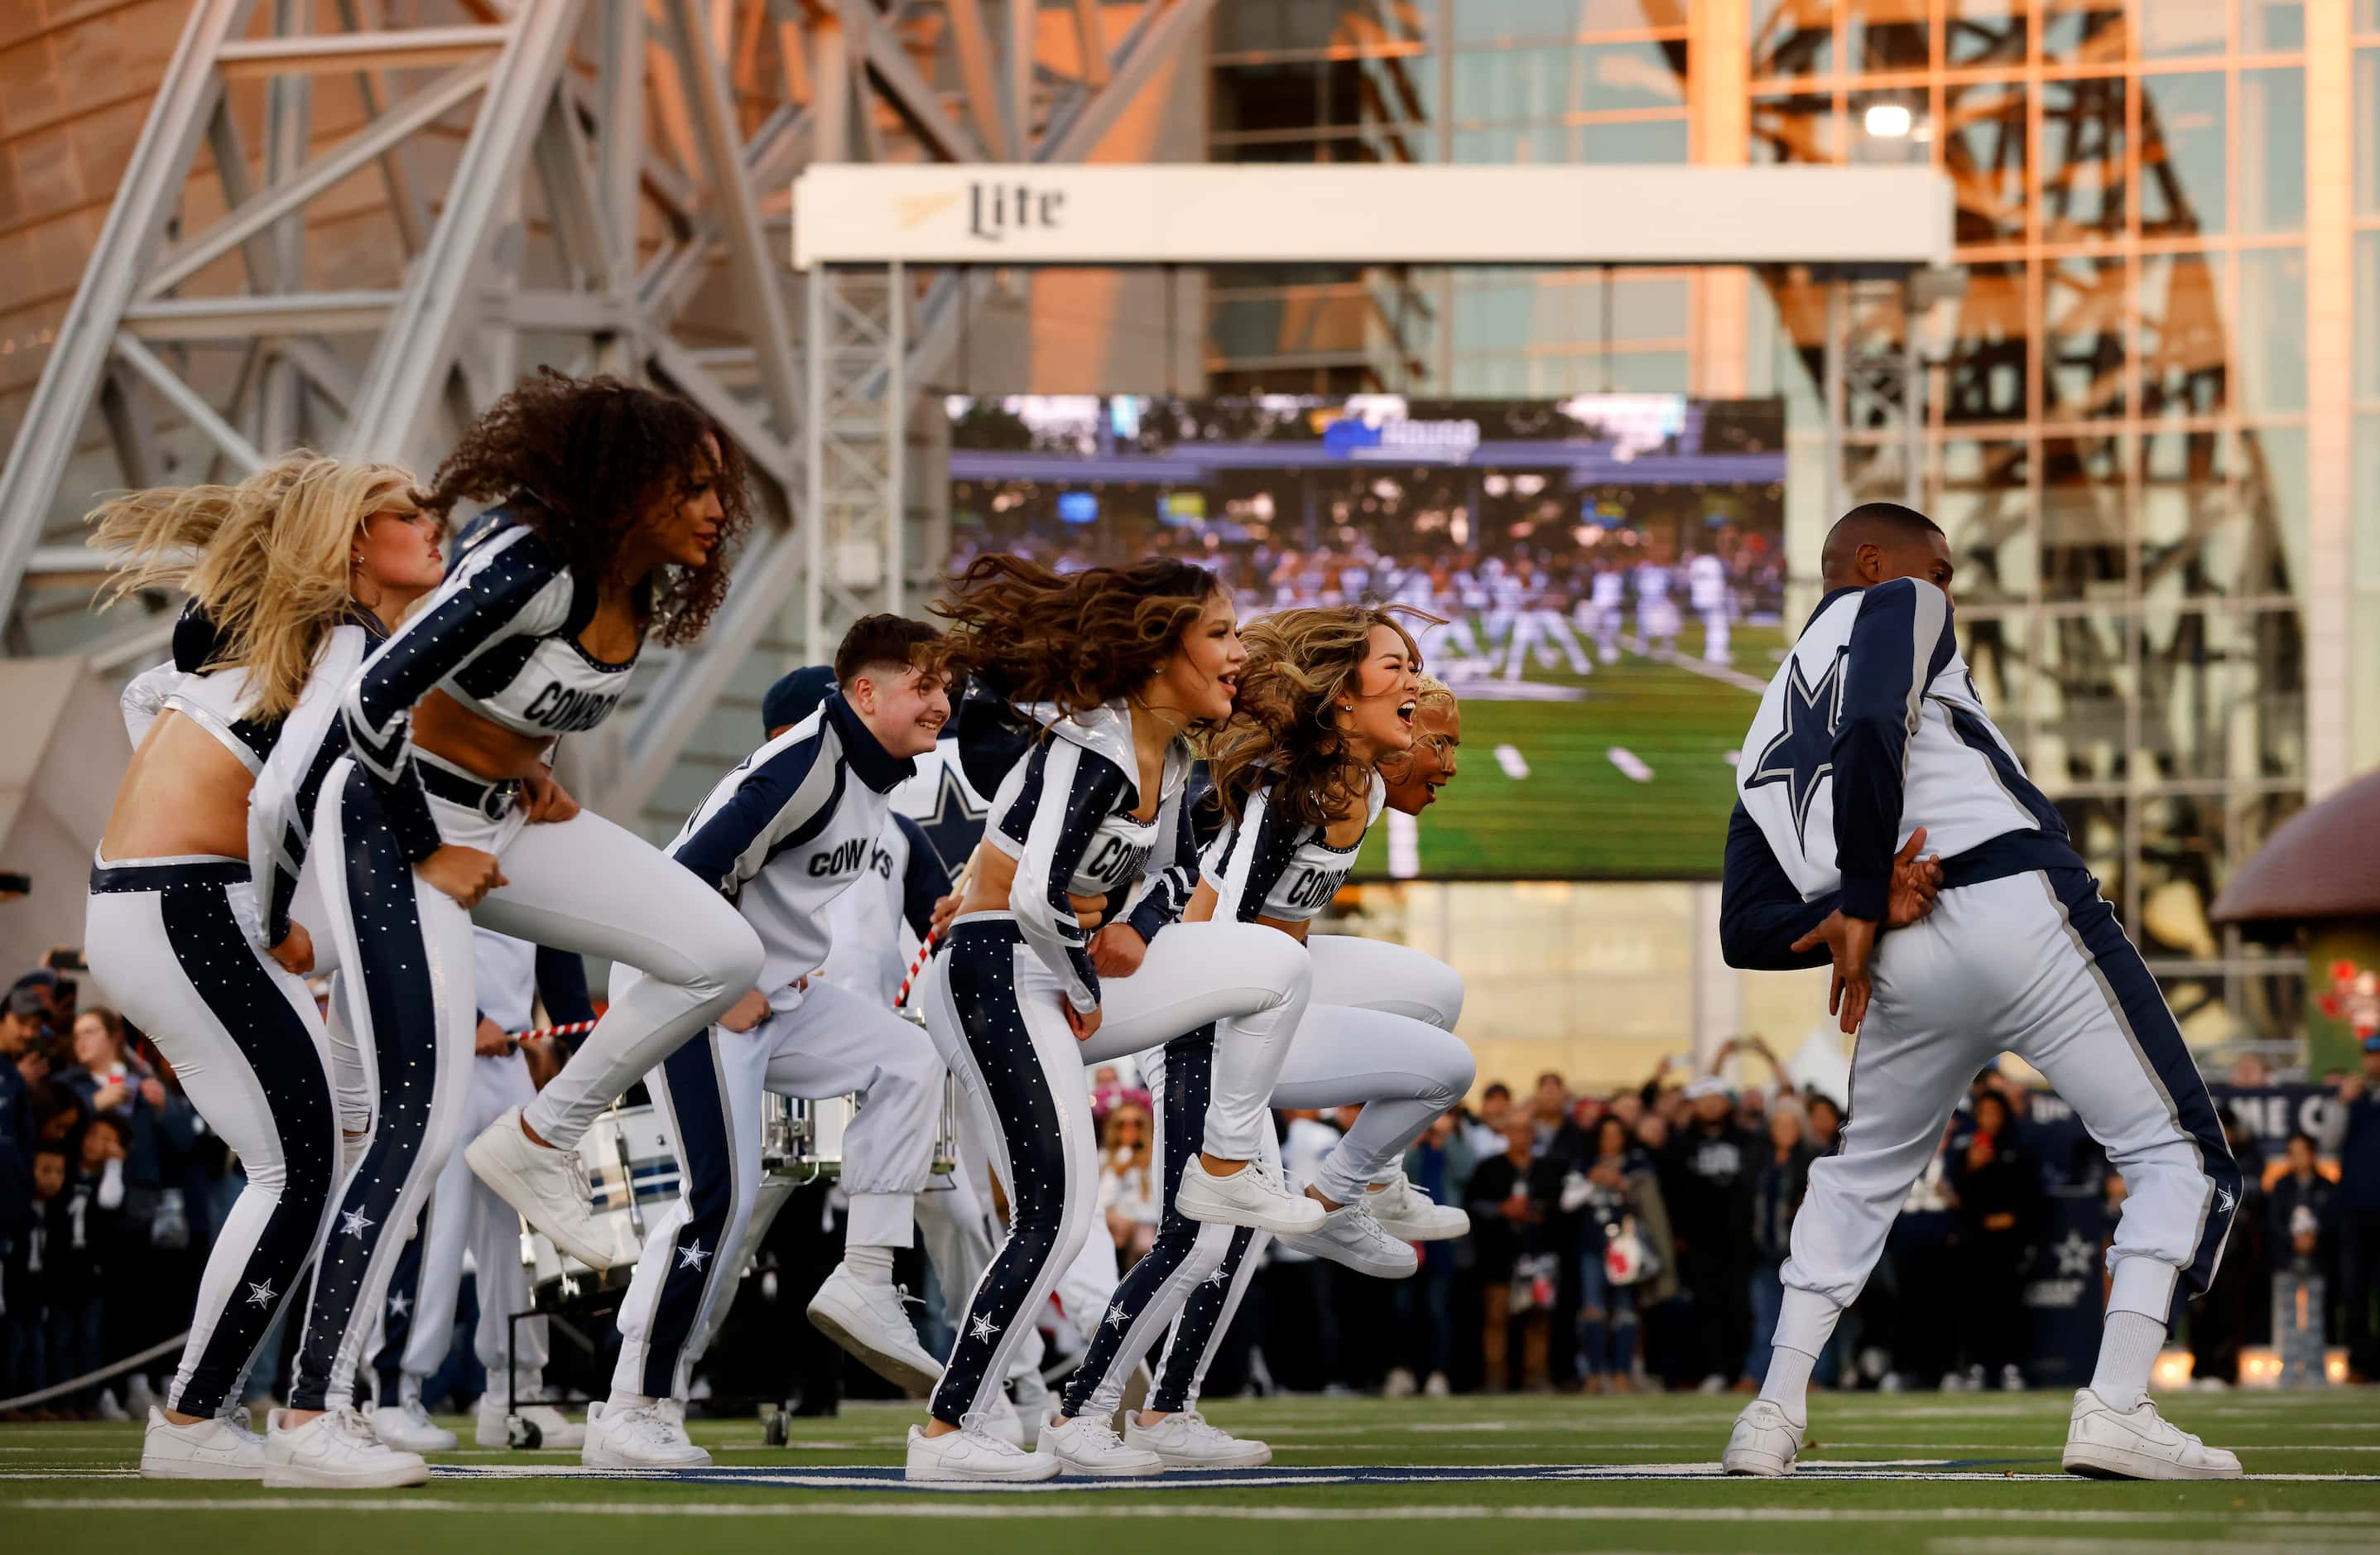 The Dallas Cowboys Rhythm & Blue drumlins and dance team perform on the West Plaza before...